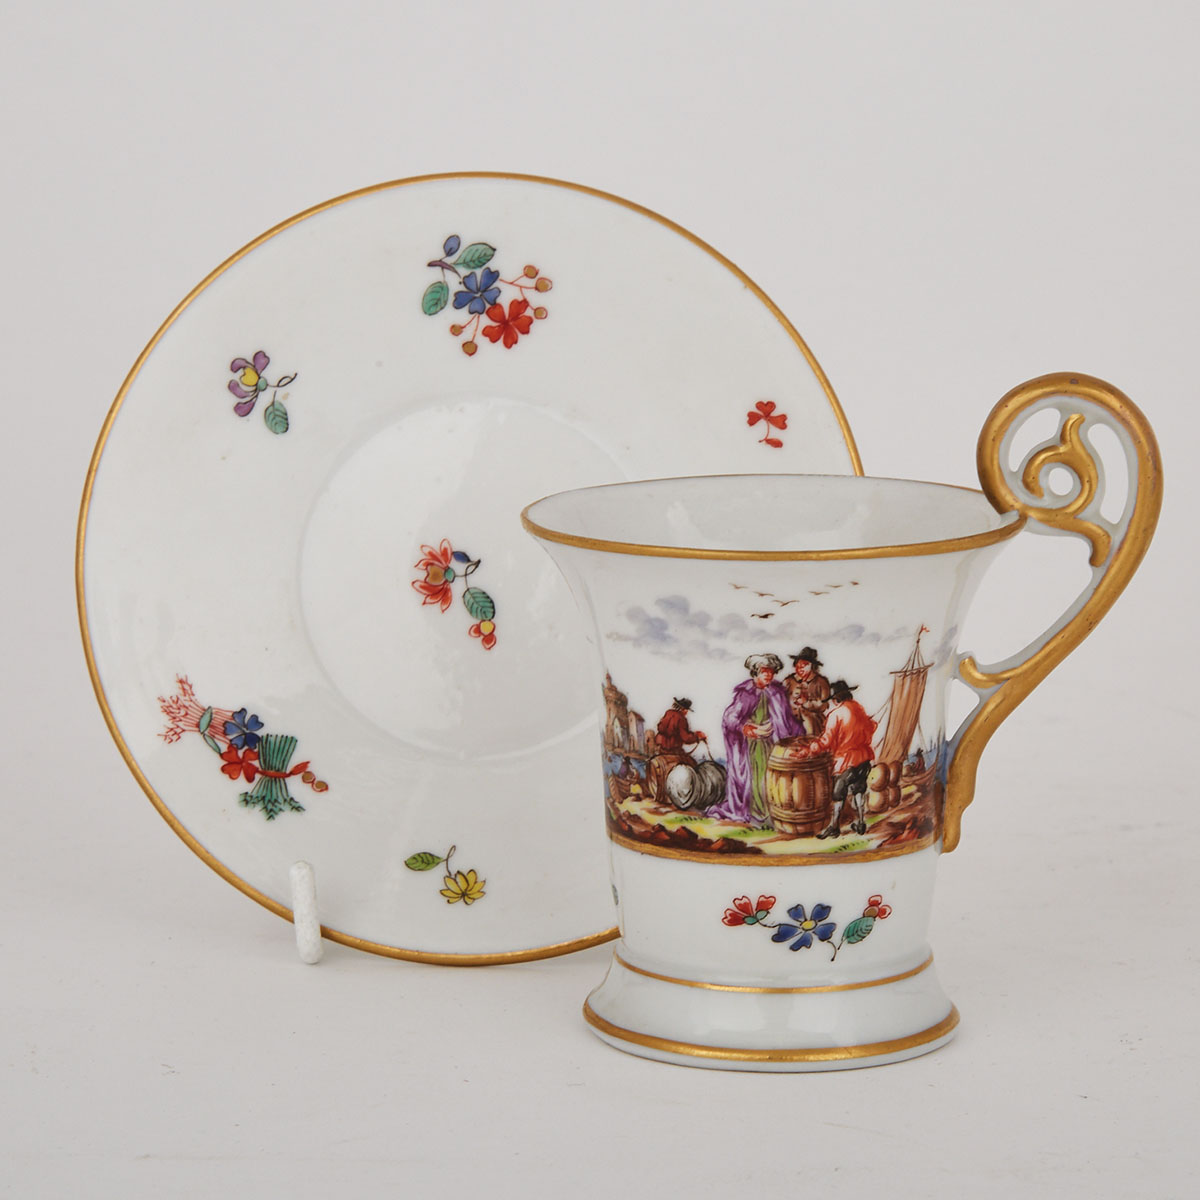 Teichert ‘Meissen’ Cup and Saucer, early 20th century